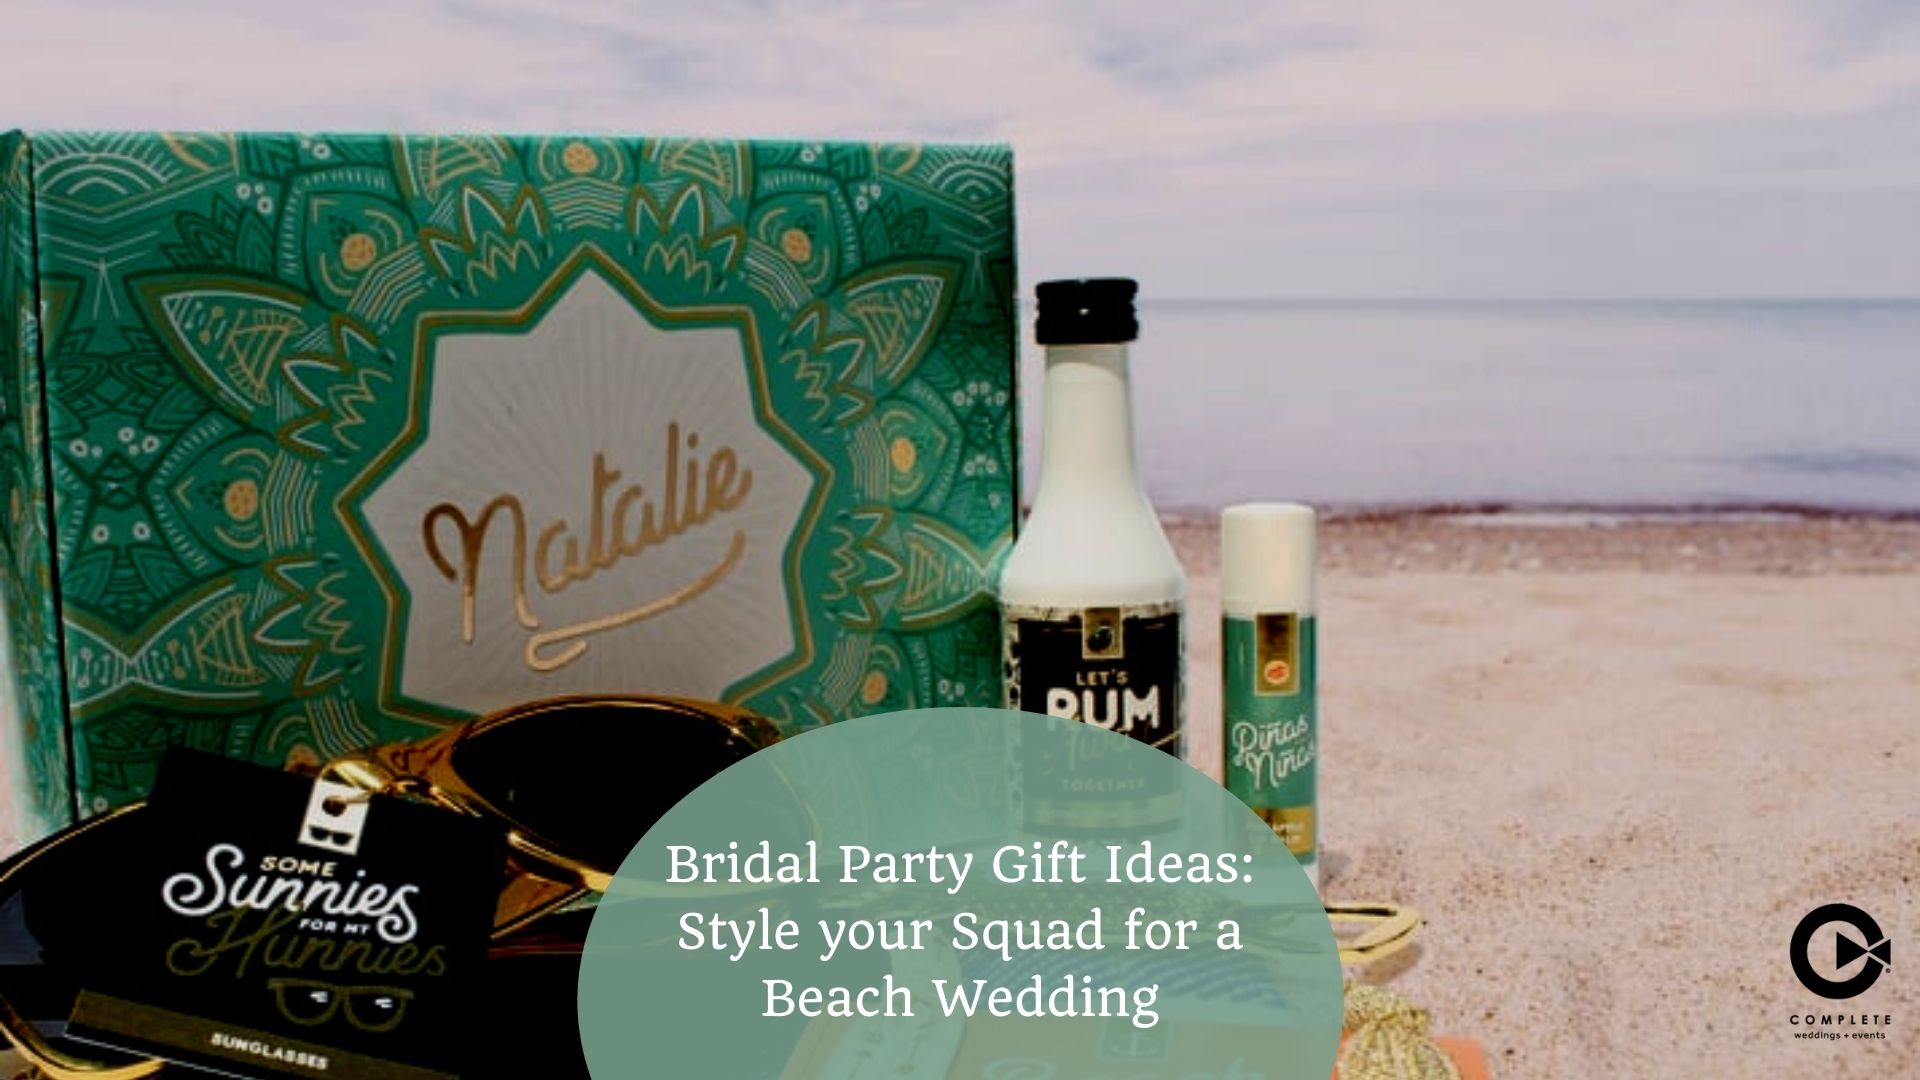 Bridal Party Gift Ideas | How to Style your Squad for a Beach Wedding